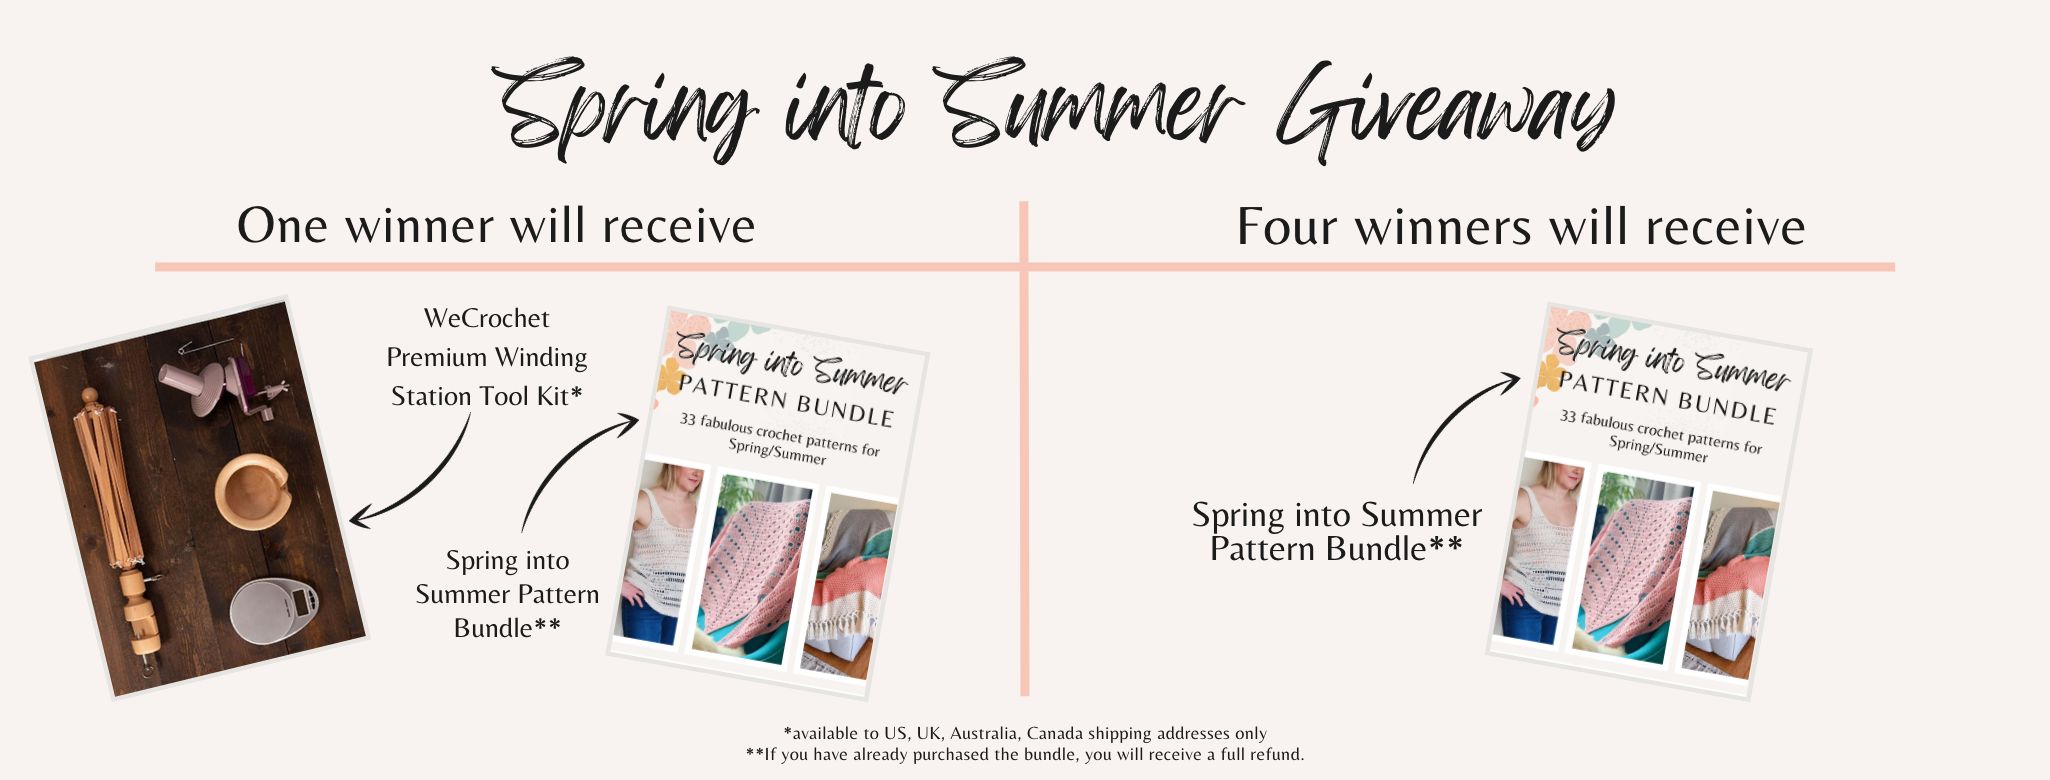 Spring Into Summer Giveaway